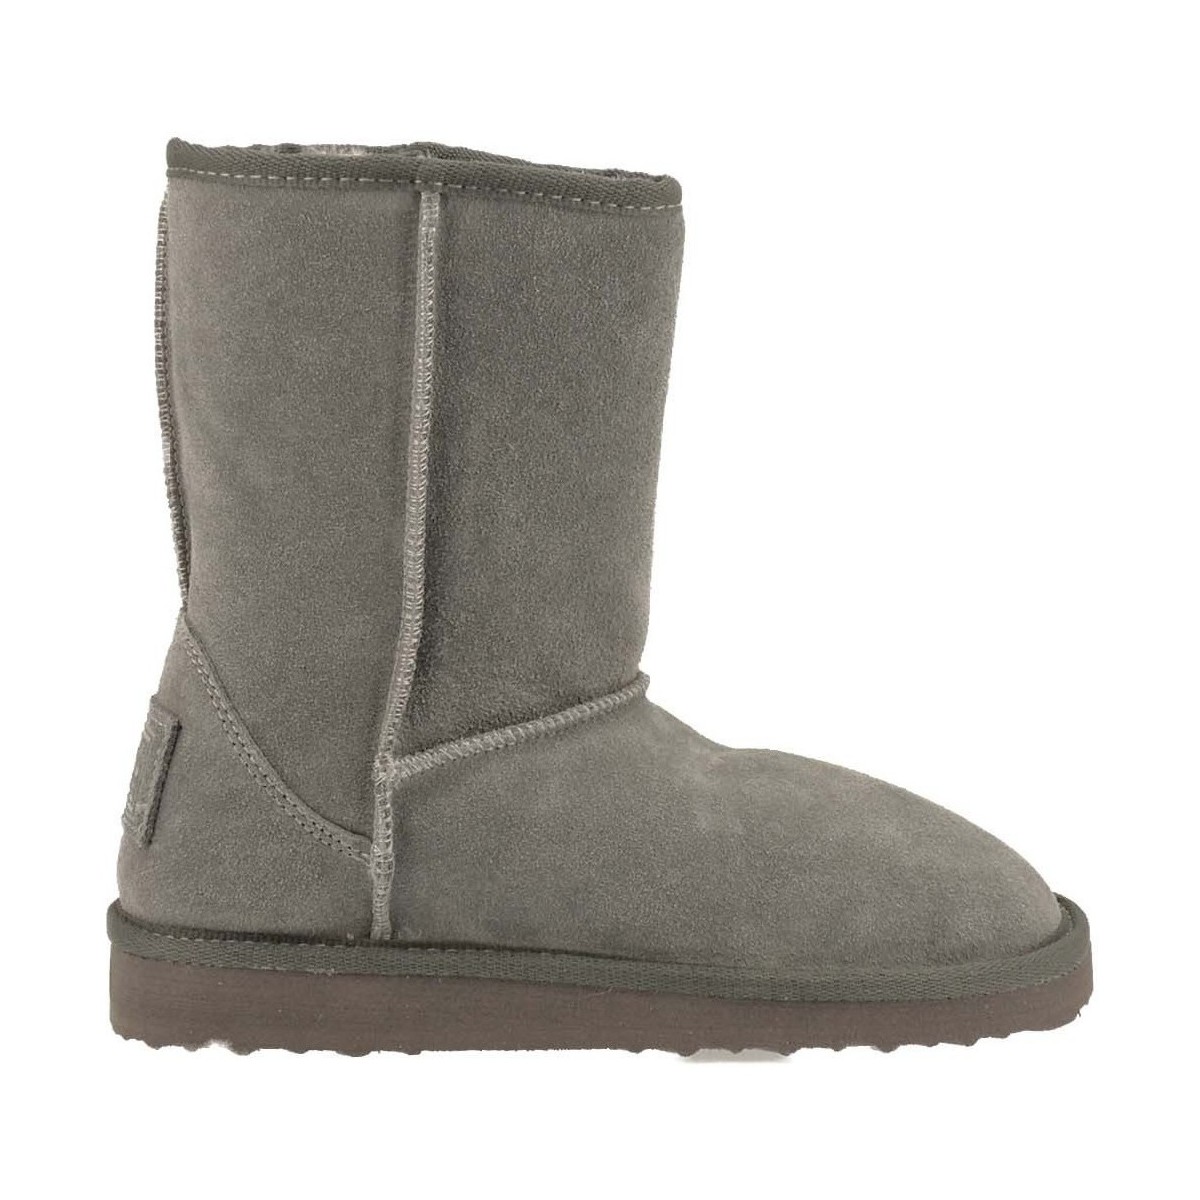 Chaussures Femme Boots Hey Dude Alpes Gris